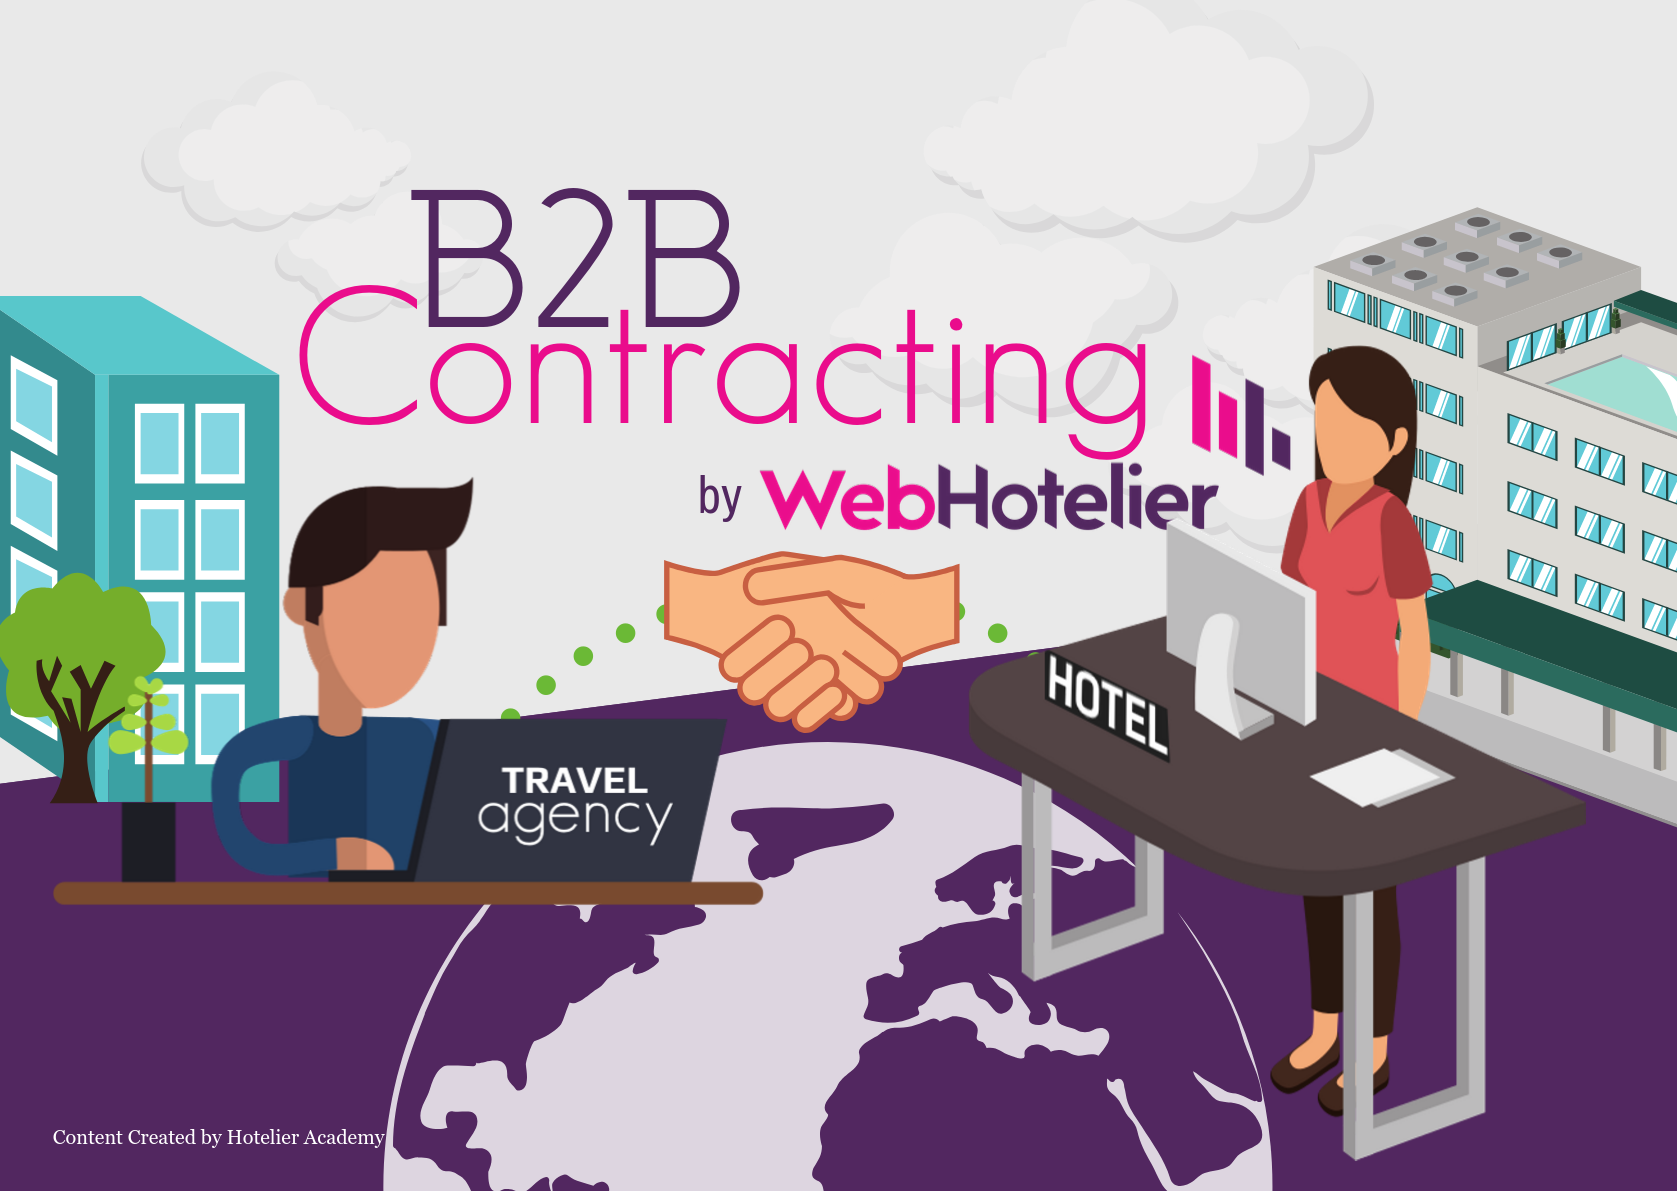 B2B Contracting by WebHotelier: Develop new contracts & partnerships with Travel Agents, through your hotel’s booking engine!